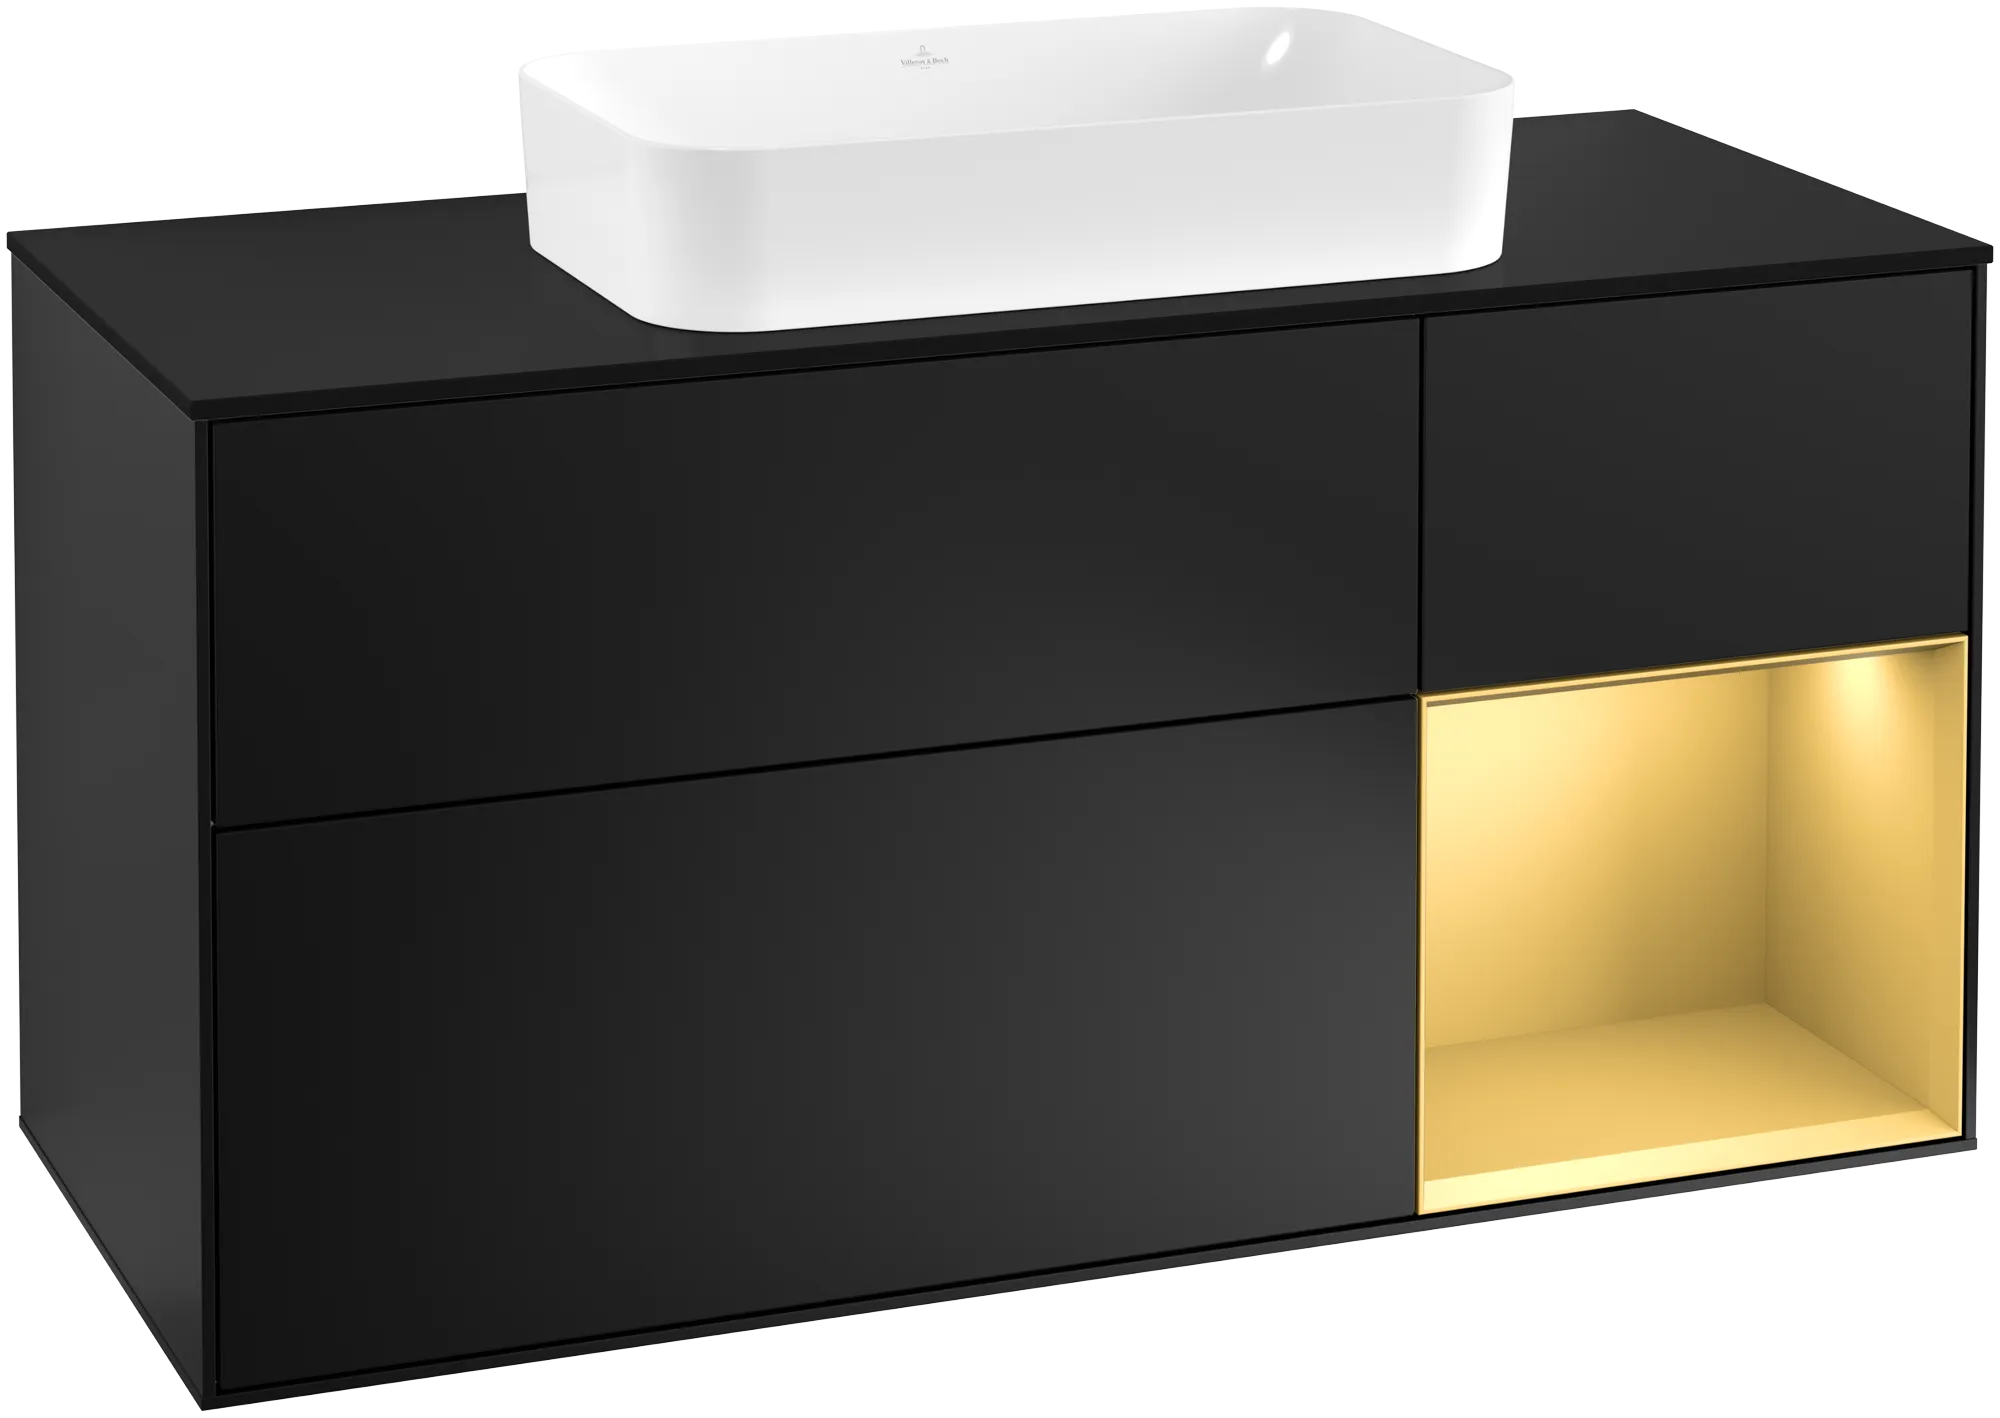 Obrázek VILLEROY BOCH Finion Vanity unit, with lighting, 3 pull-out compartments, 1200 x 603 x 501 mm, Black Matt Lacquer / Gold Matt Lacquer / Glass Black Matt #G302HFPD